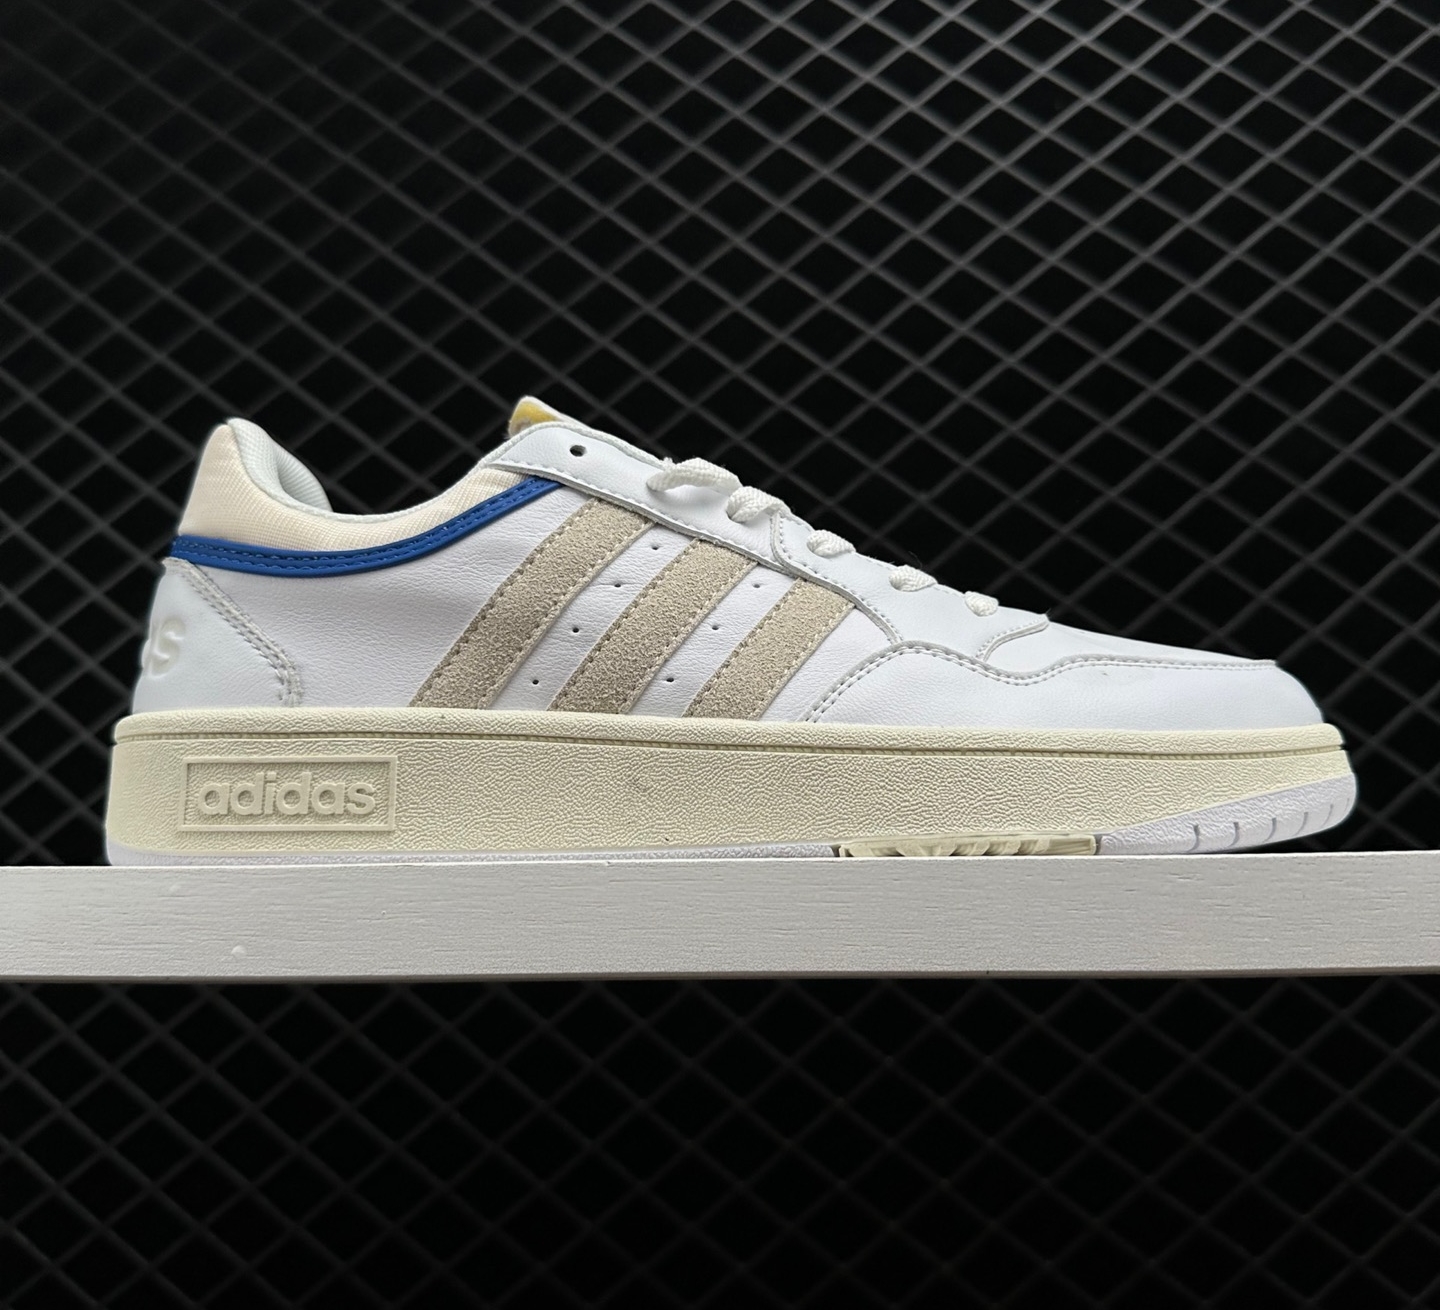 Adidas Neo Hoops 3.0 White Blue GZ1346: Classic Style with Modern Flavor